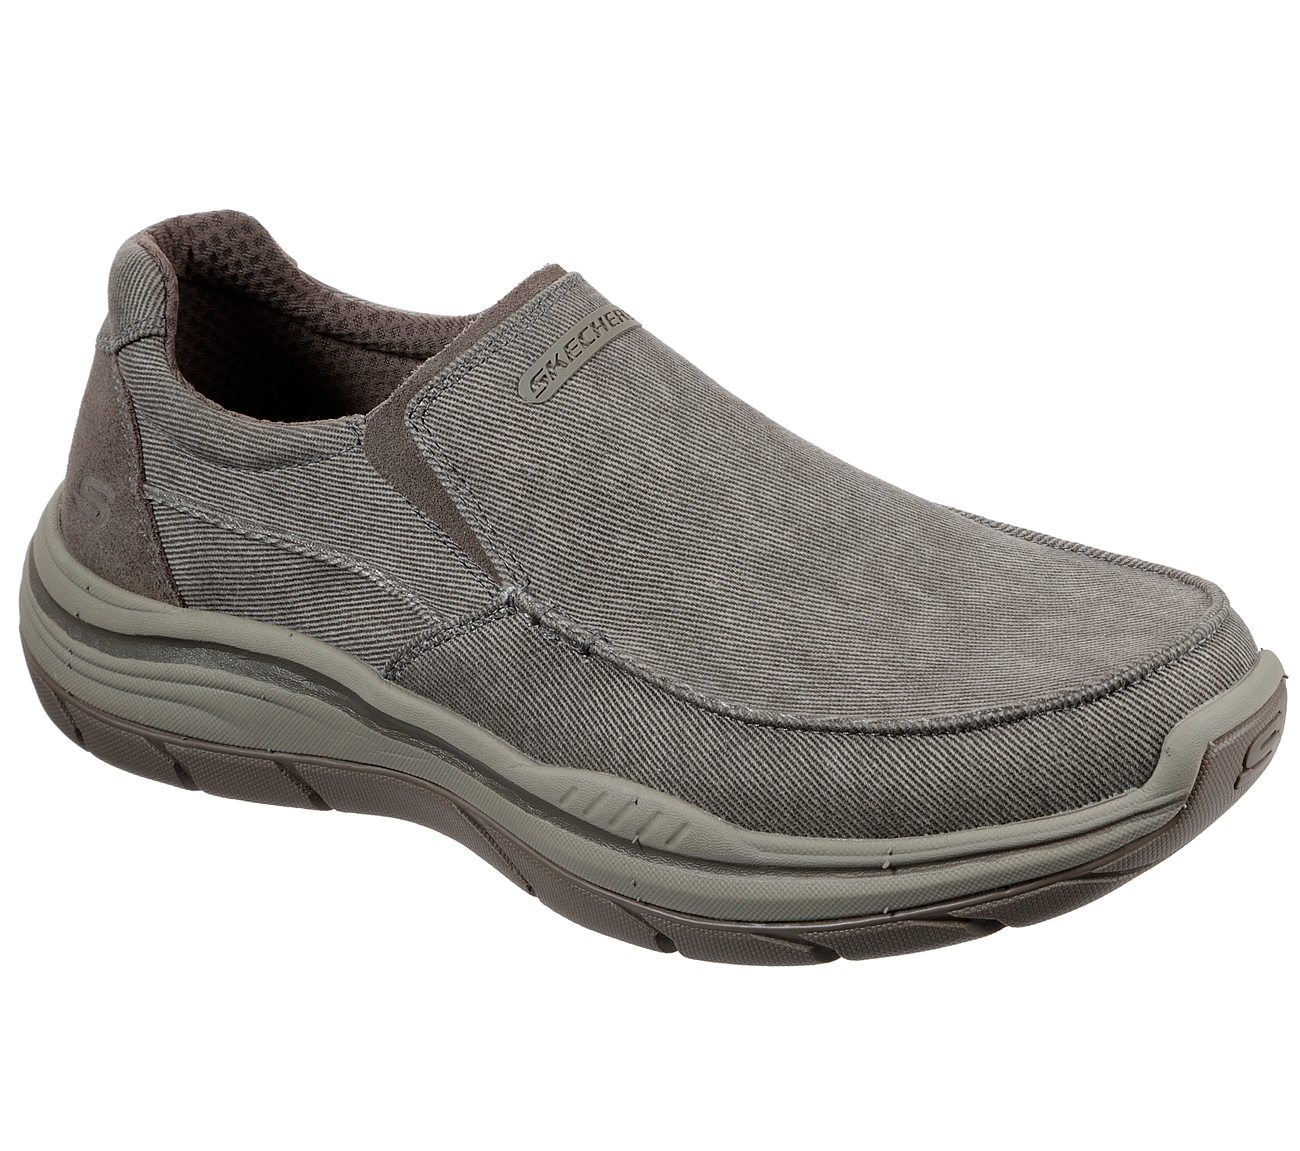 Hurven EXTRA WIDE FIT USA Casuals Shoes